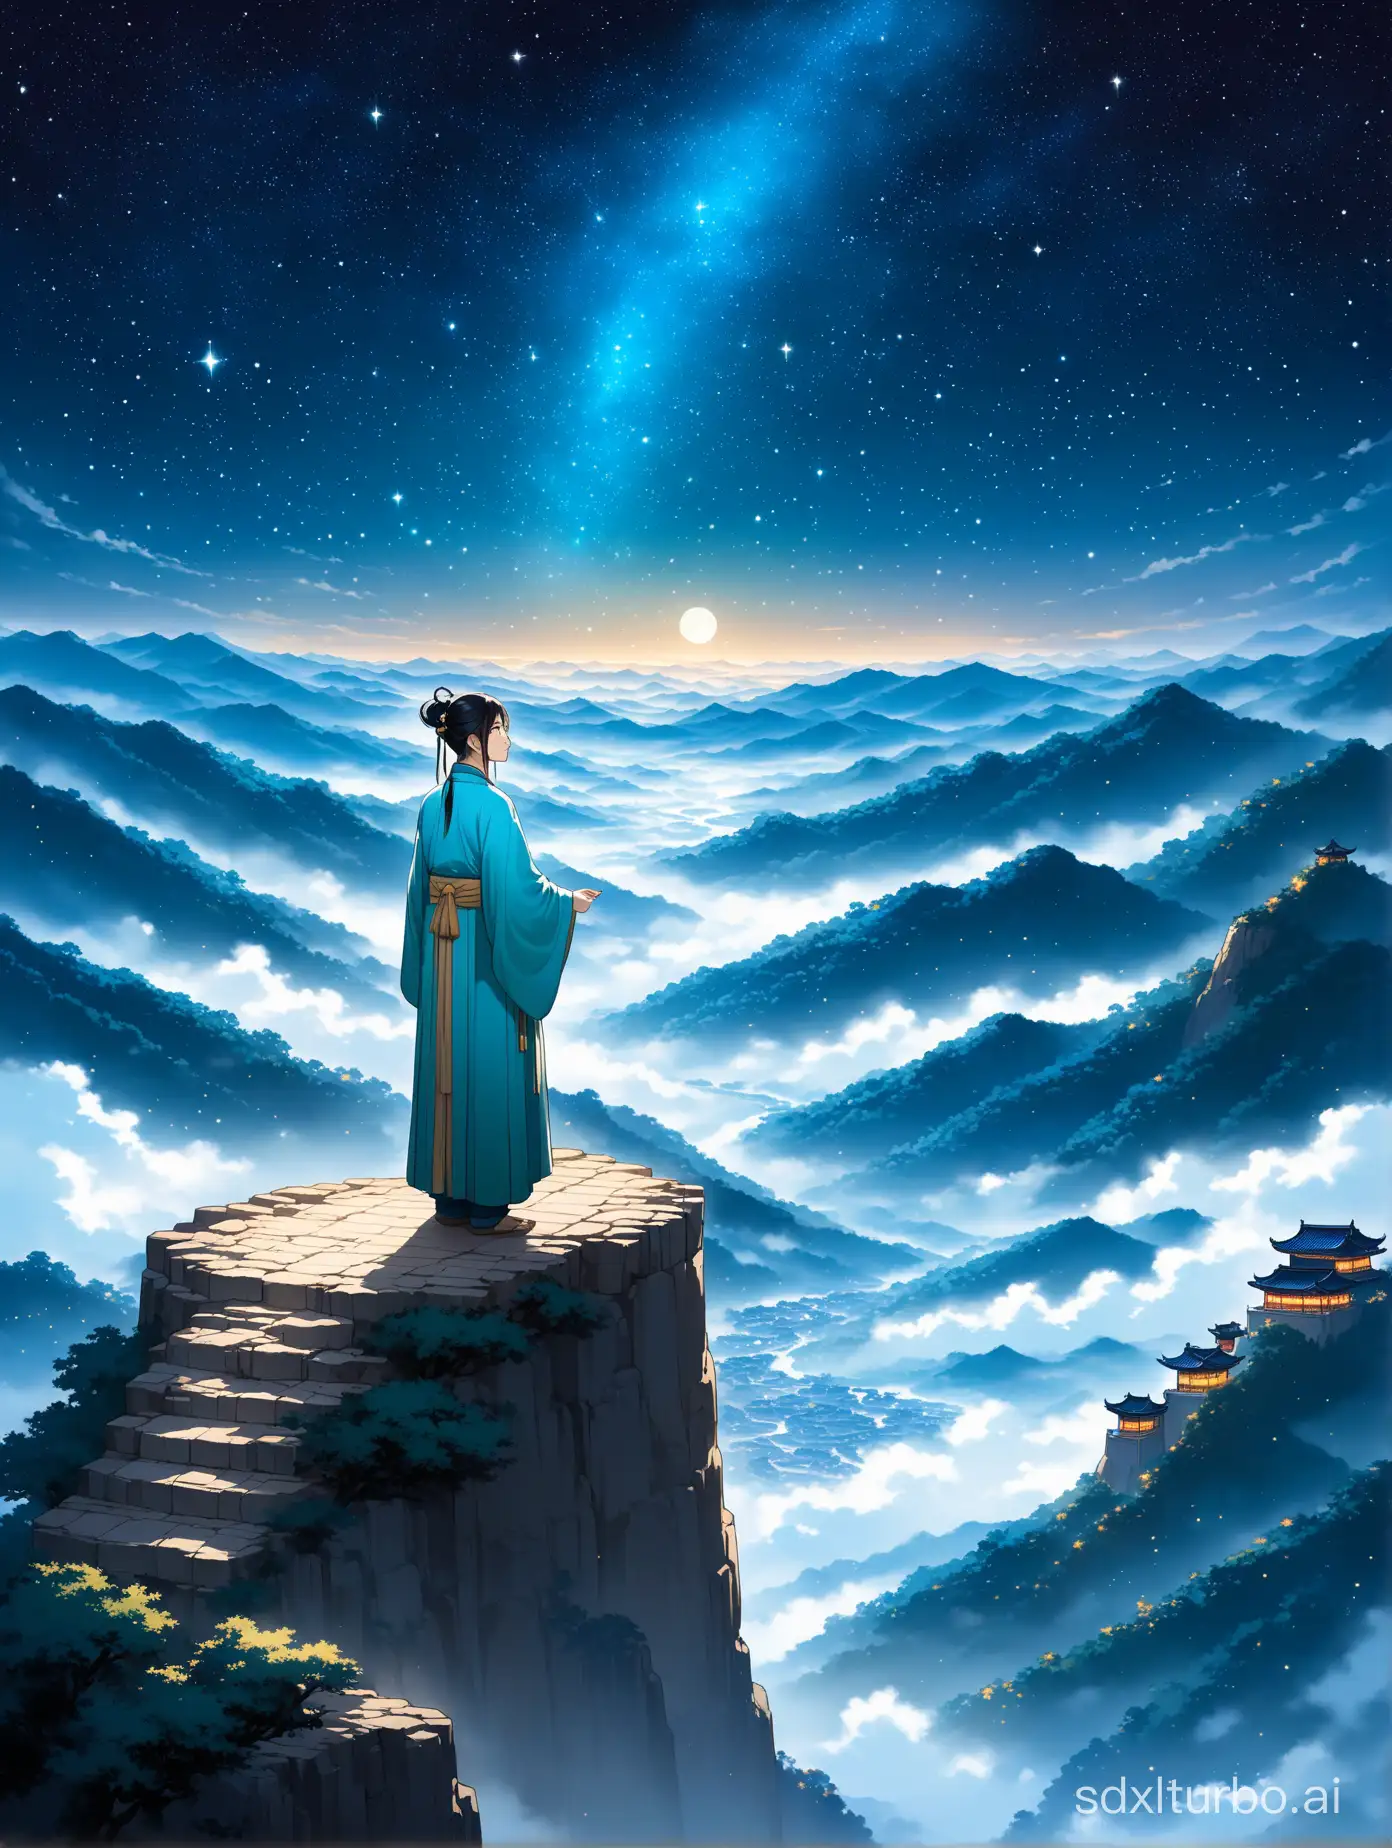 "A mystical and timeless scene depicting a scholar in ancient China, standing on a high cliff overlooking a vast, starry night sky. The scholar, dressed in traditional flowing Hanfu, looks upward with a contemplative expression, seemingly questioning the heavens. The sky is filled with stars and a visible celestial palace, suggesting an otherworldly realm. The landscape is serene with misty mountains in the background, adding to the ethereal and introspective atmosphere of the scene."